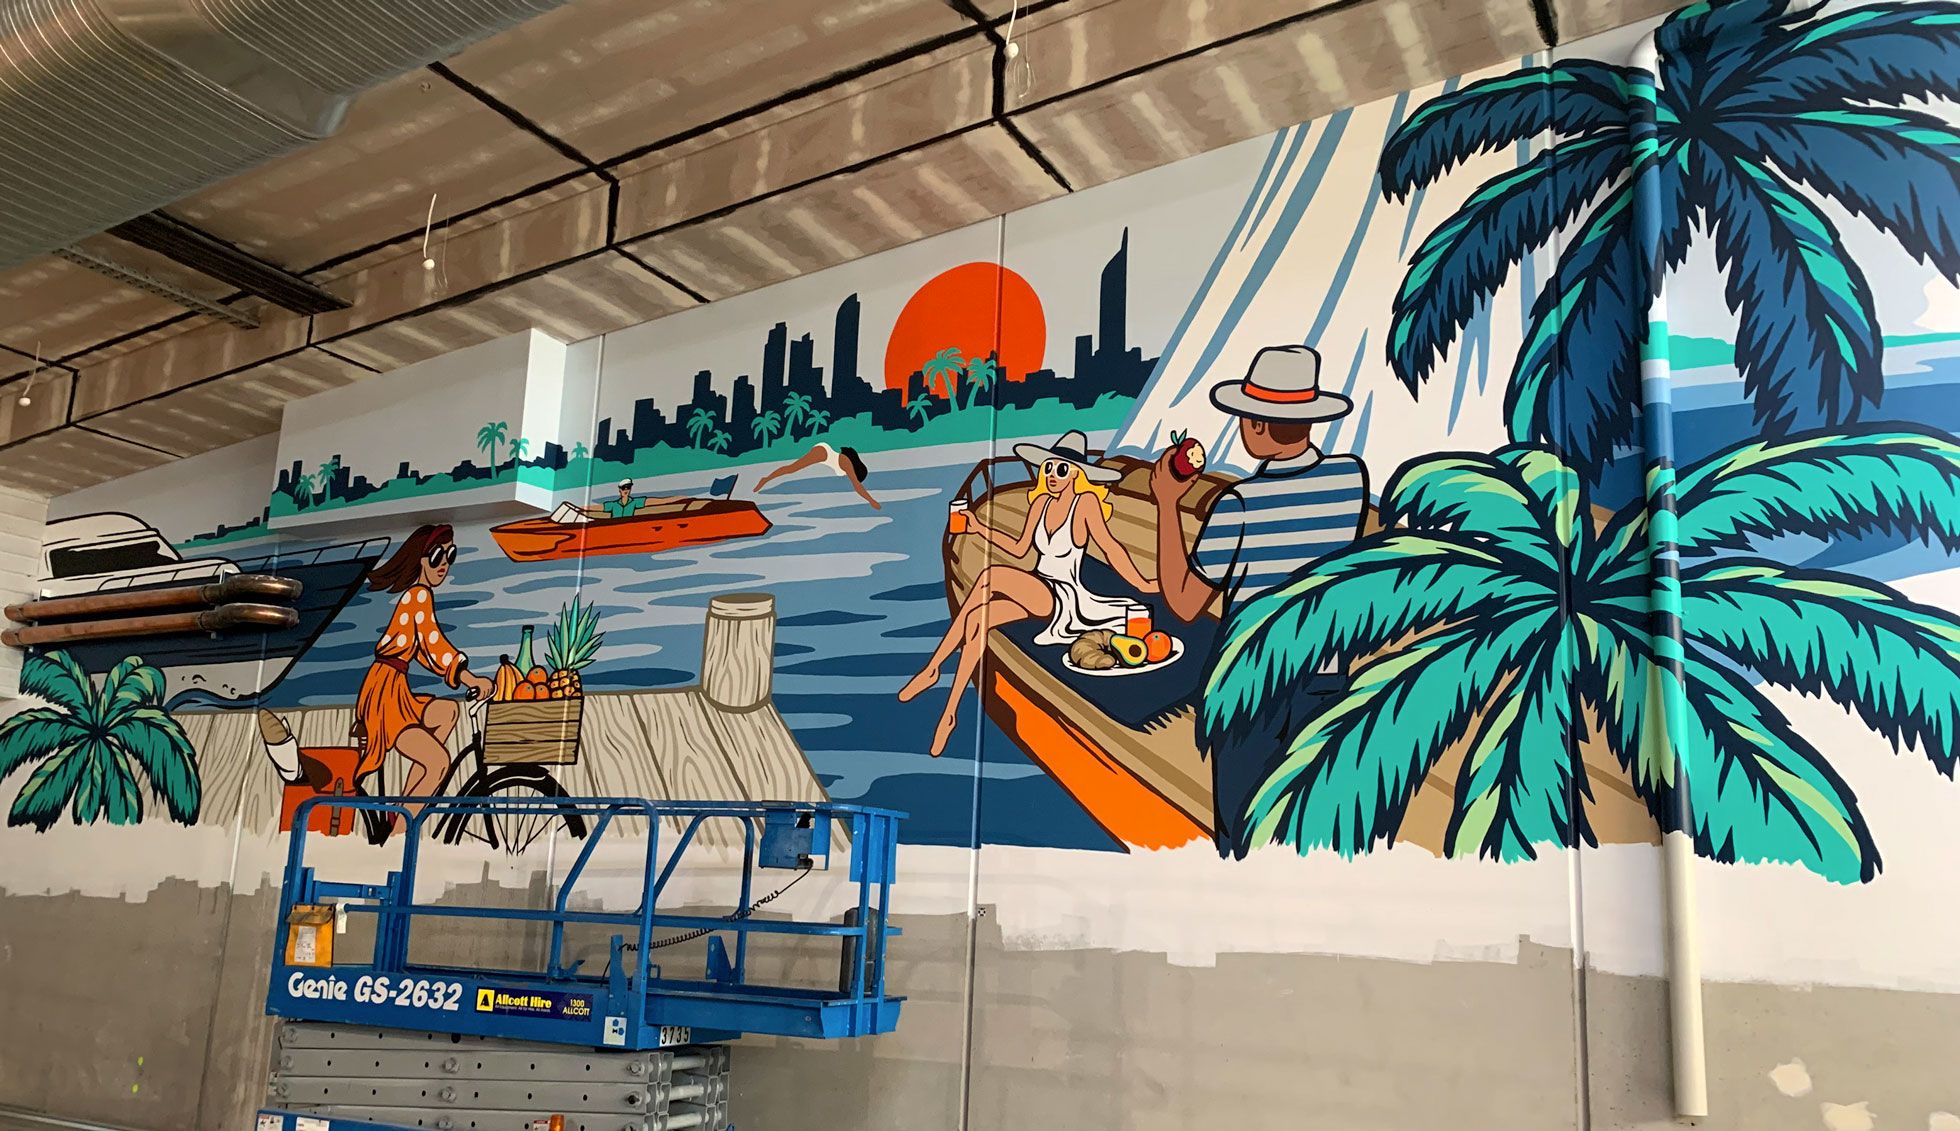 The mural features a Gold Coast waterways view with a skyscape, setting sun and yachts